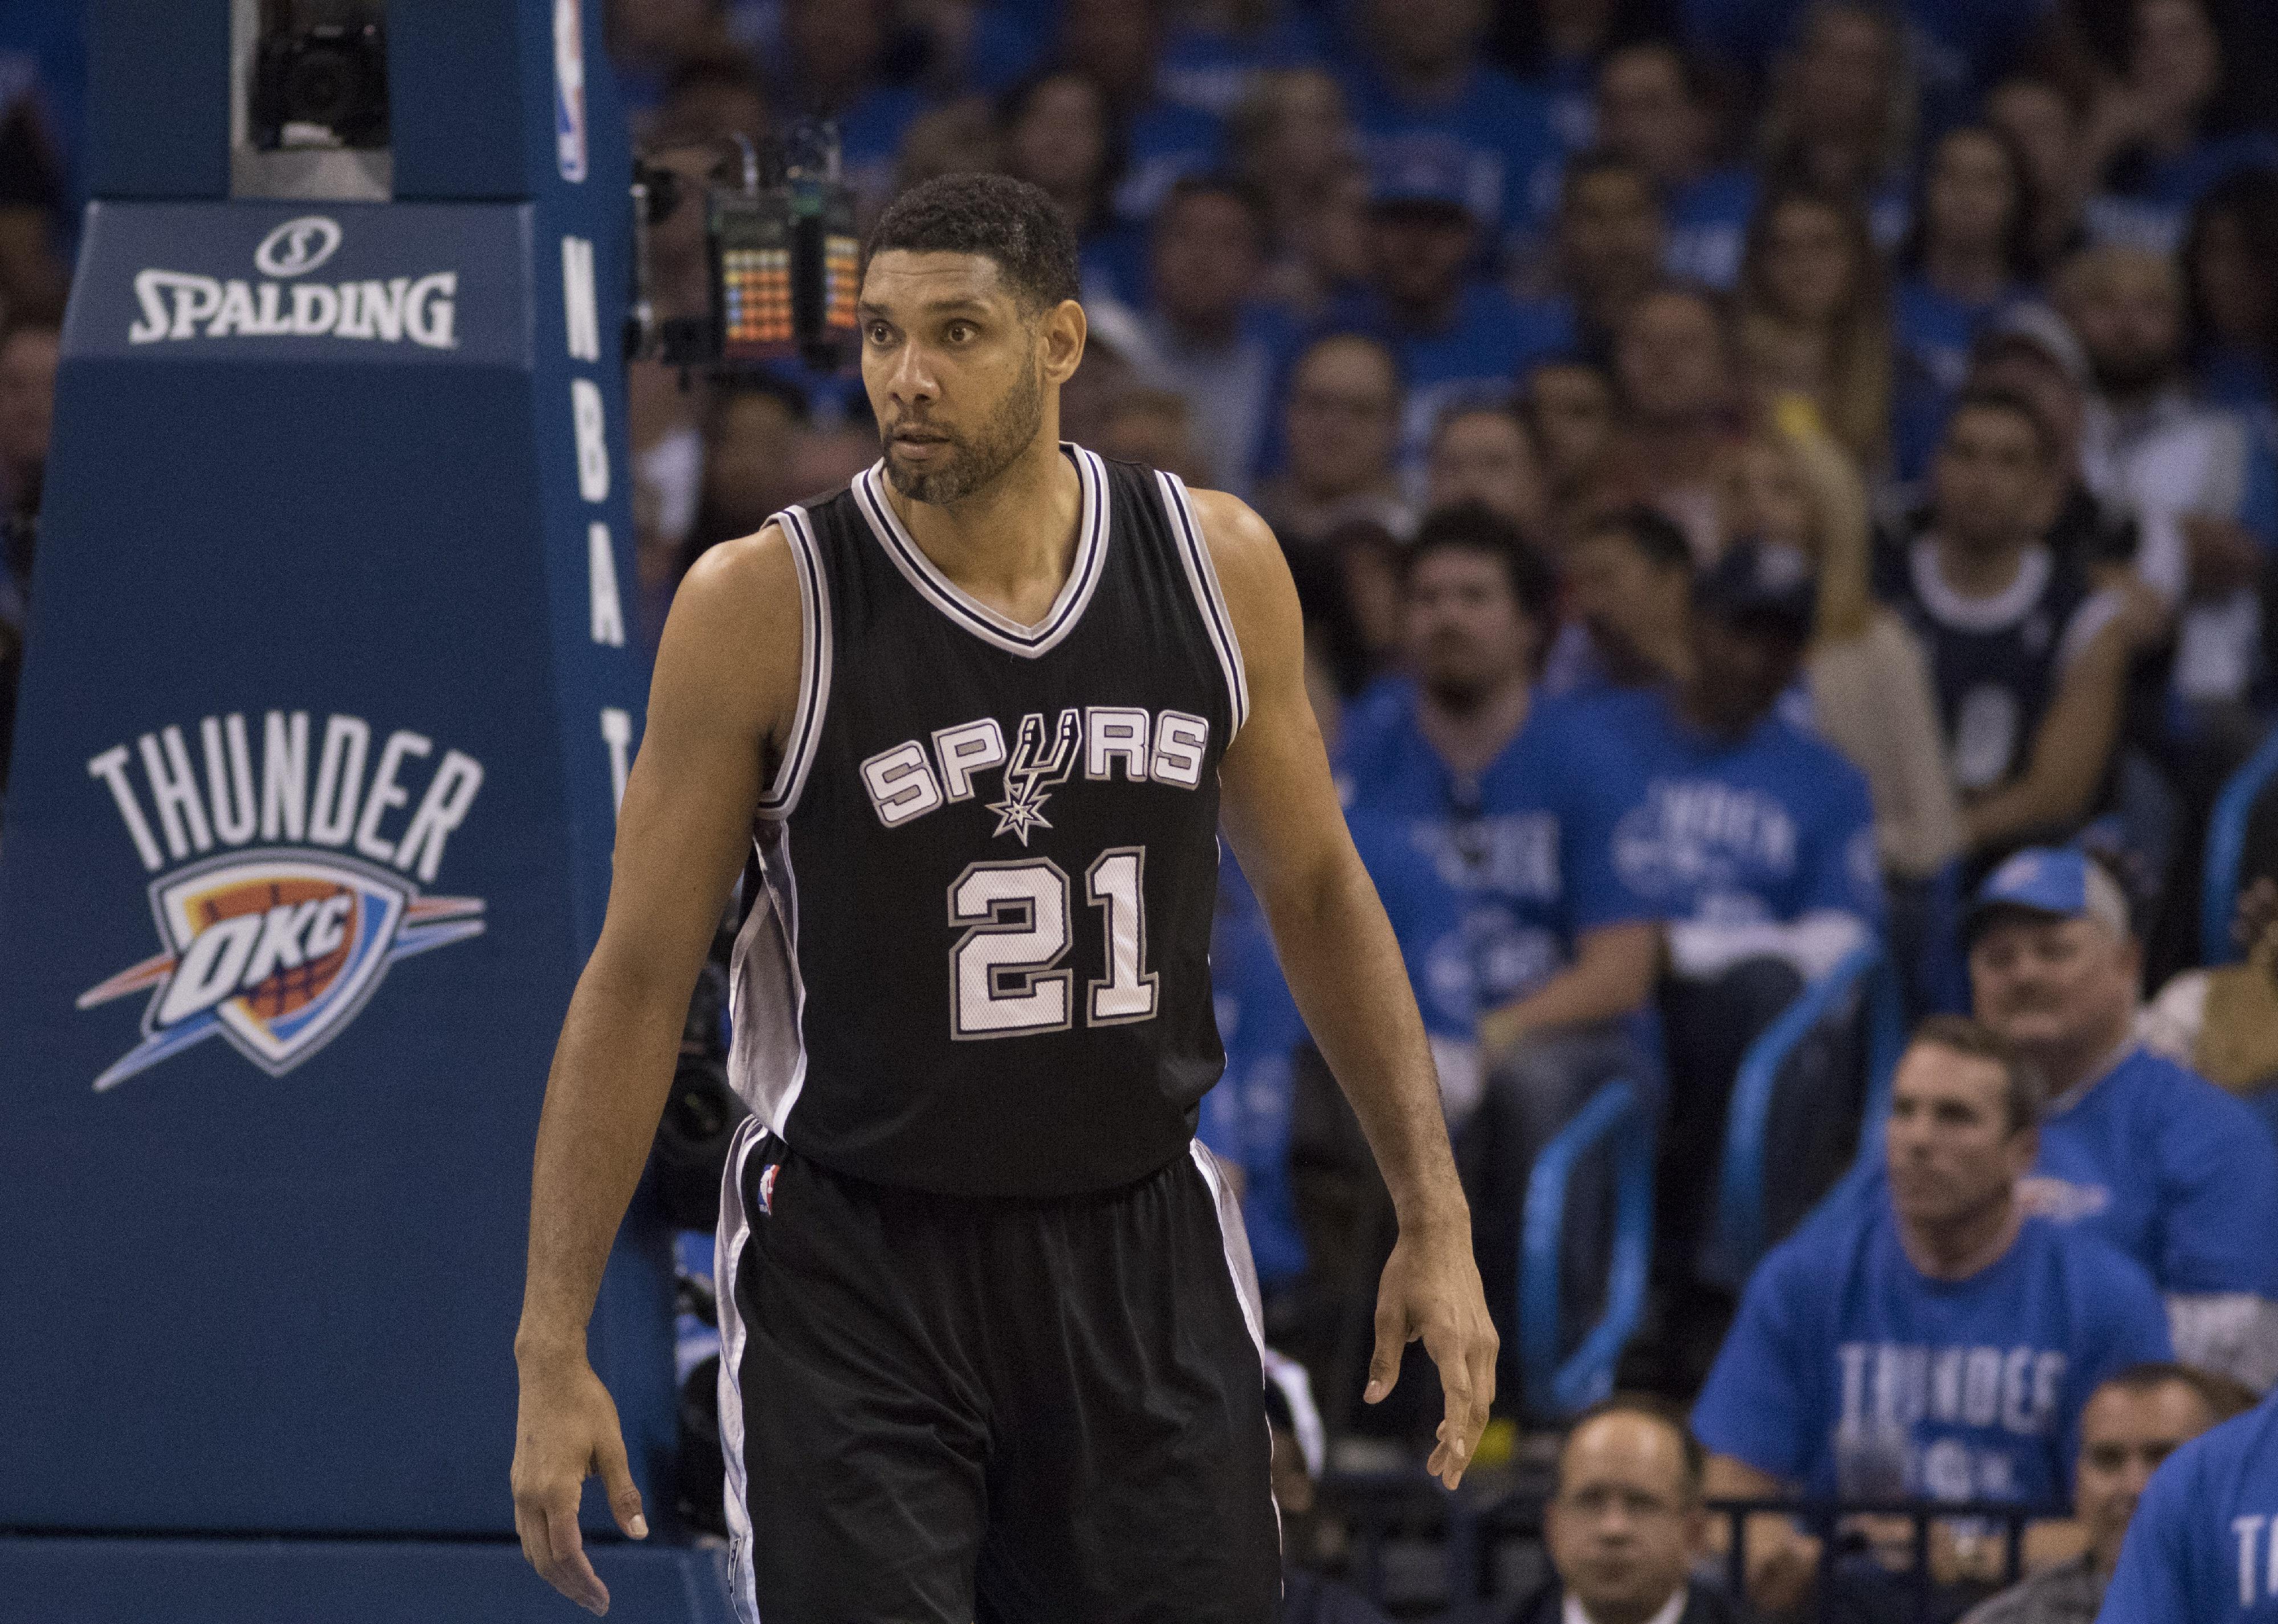 Tim Duncan of the San Antonio Spurs looks on during a game.